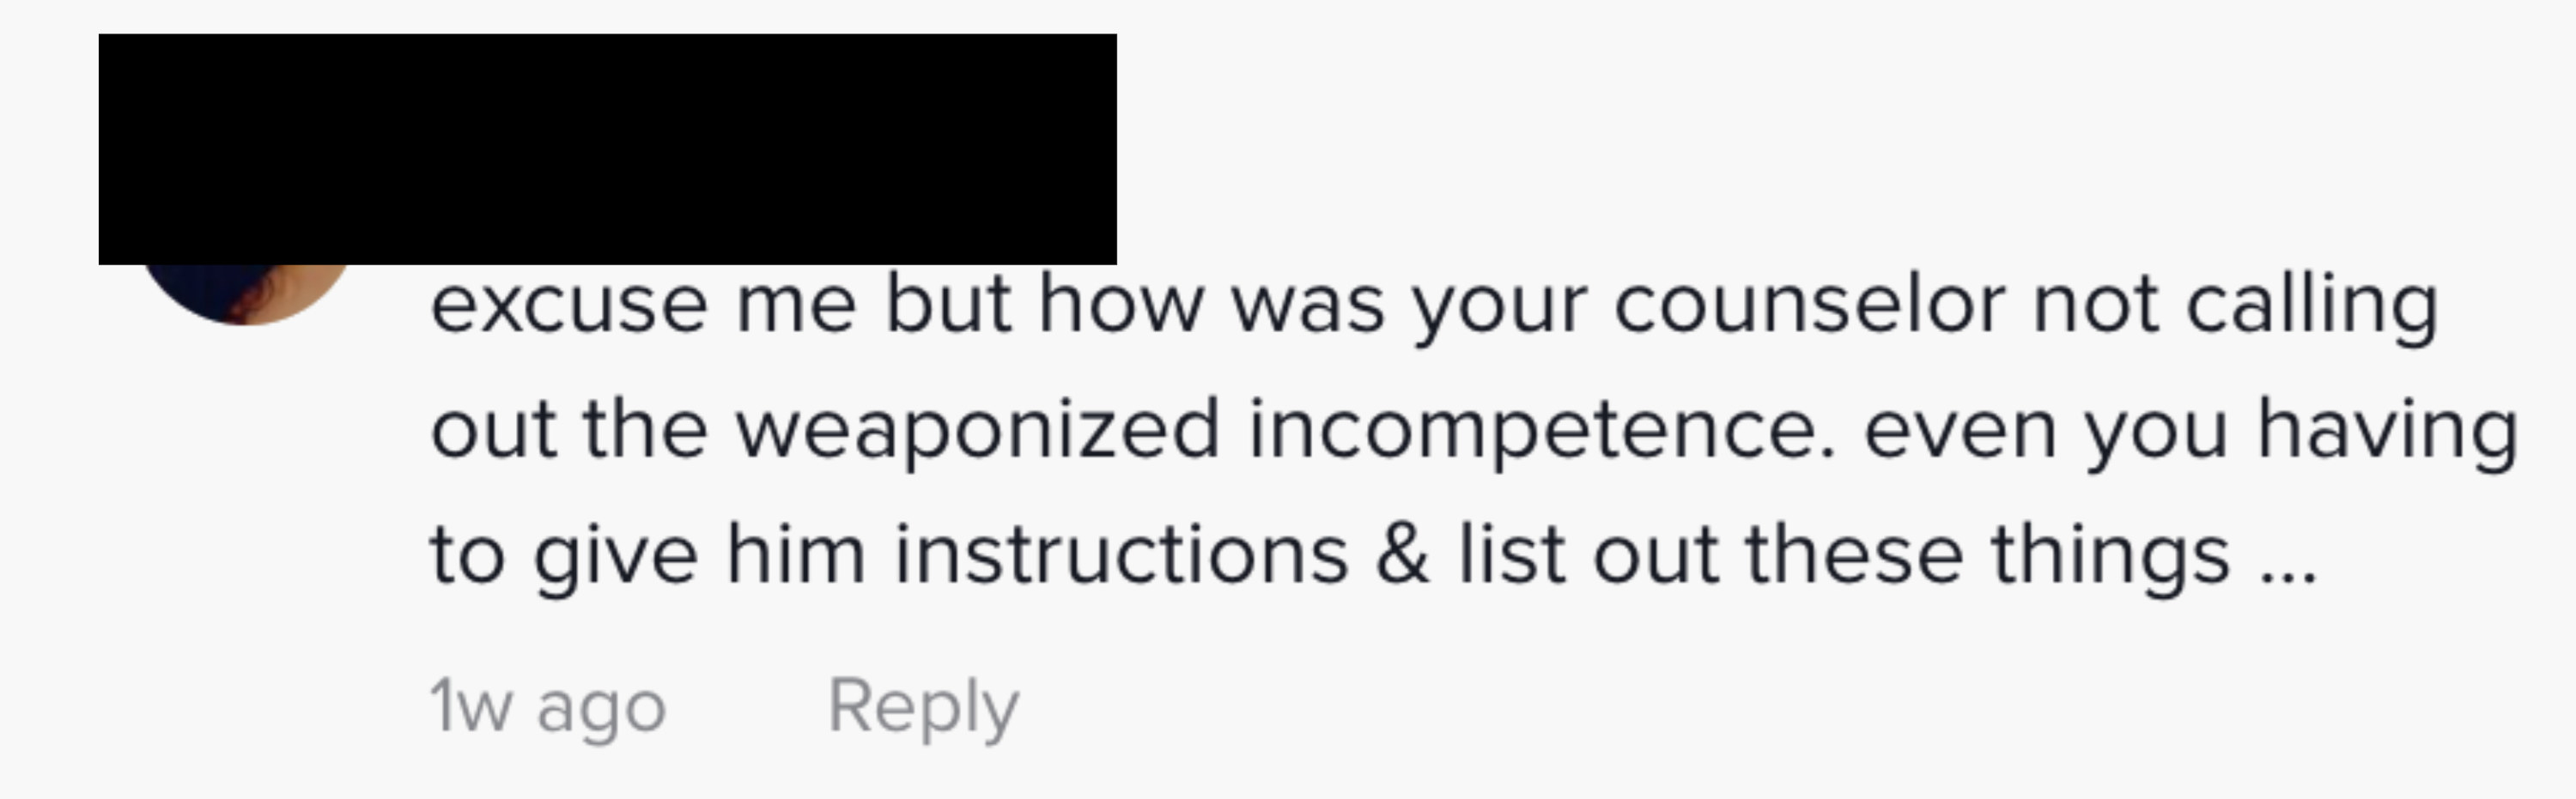 This comment saus &quot;excuse me but how was your counselor not calling out the weaponized incompetence, even you having to give him instructions and list out these things&quot;